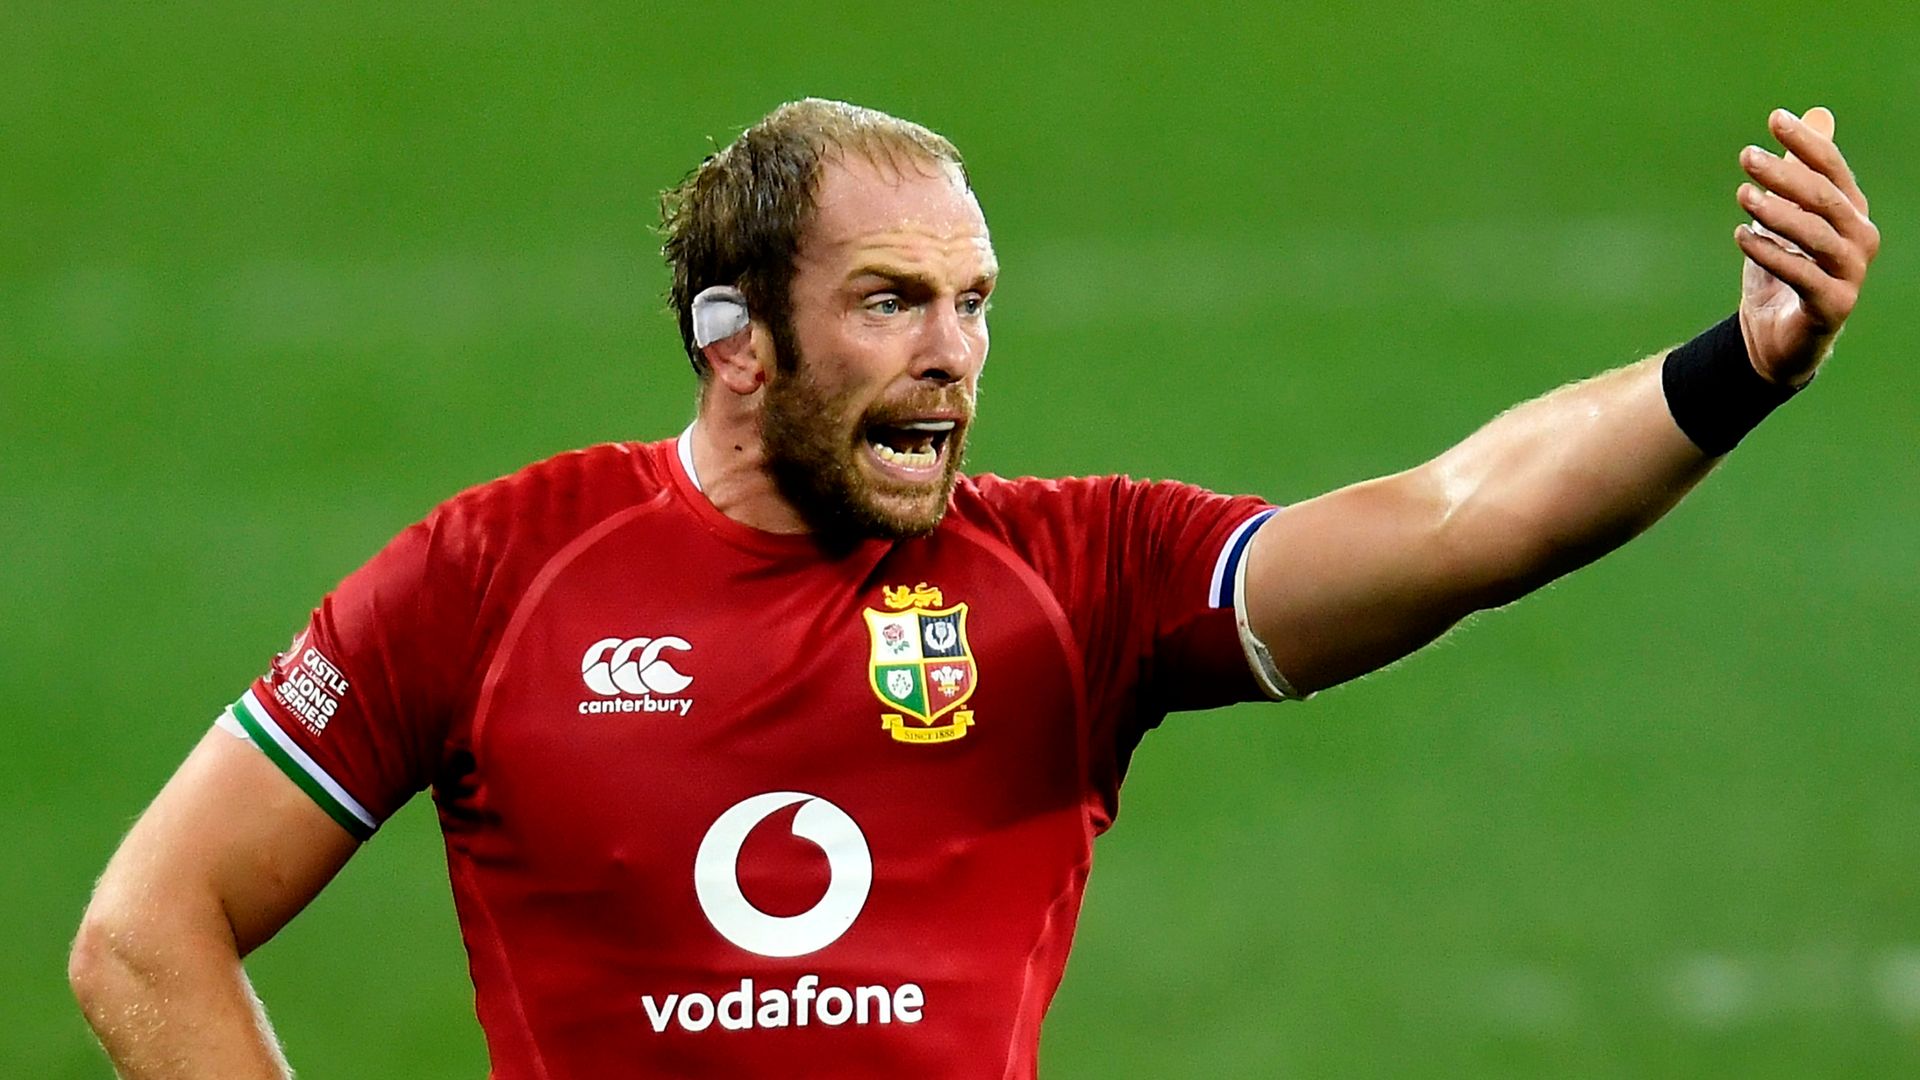 Is Alun Wyn Jones in contention for the first Test?